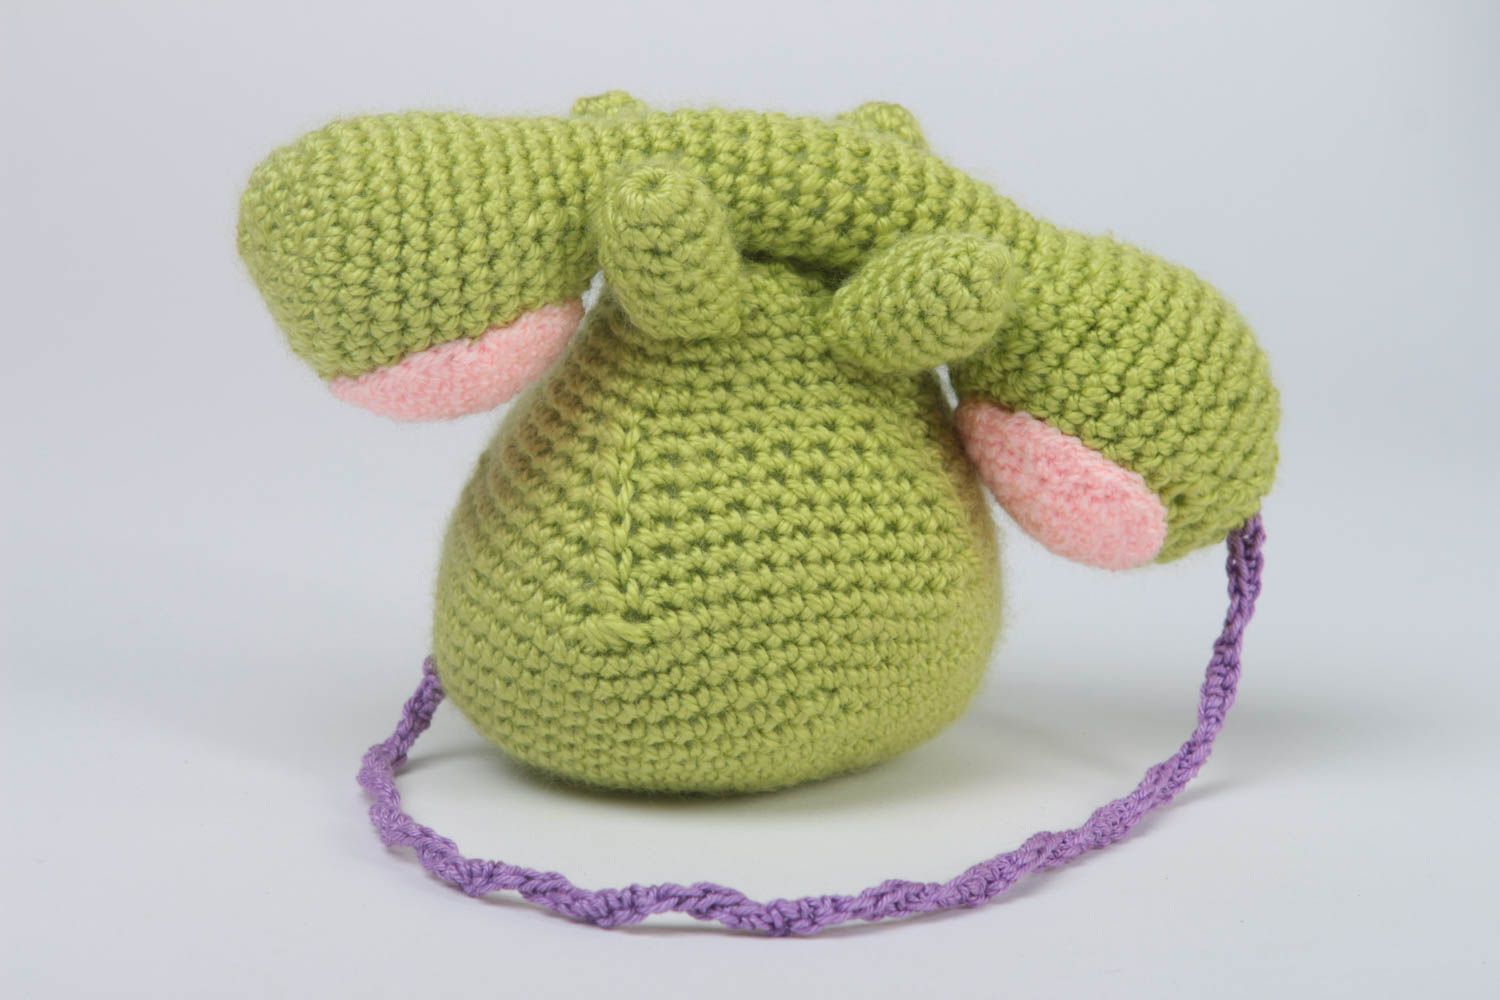 Handmade crocheted toy for children nursery decor stuffed toy for babies photo 4